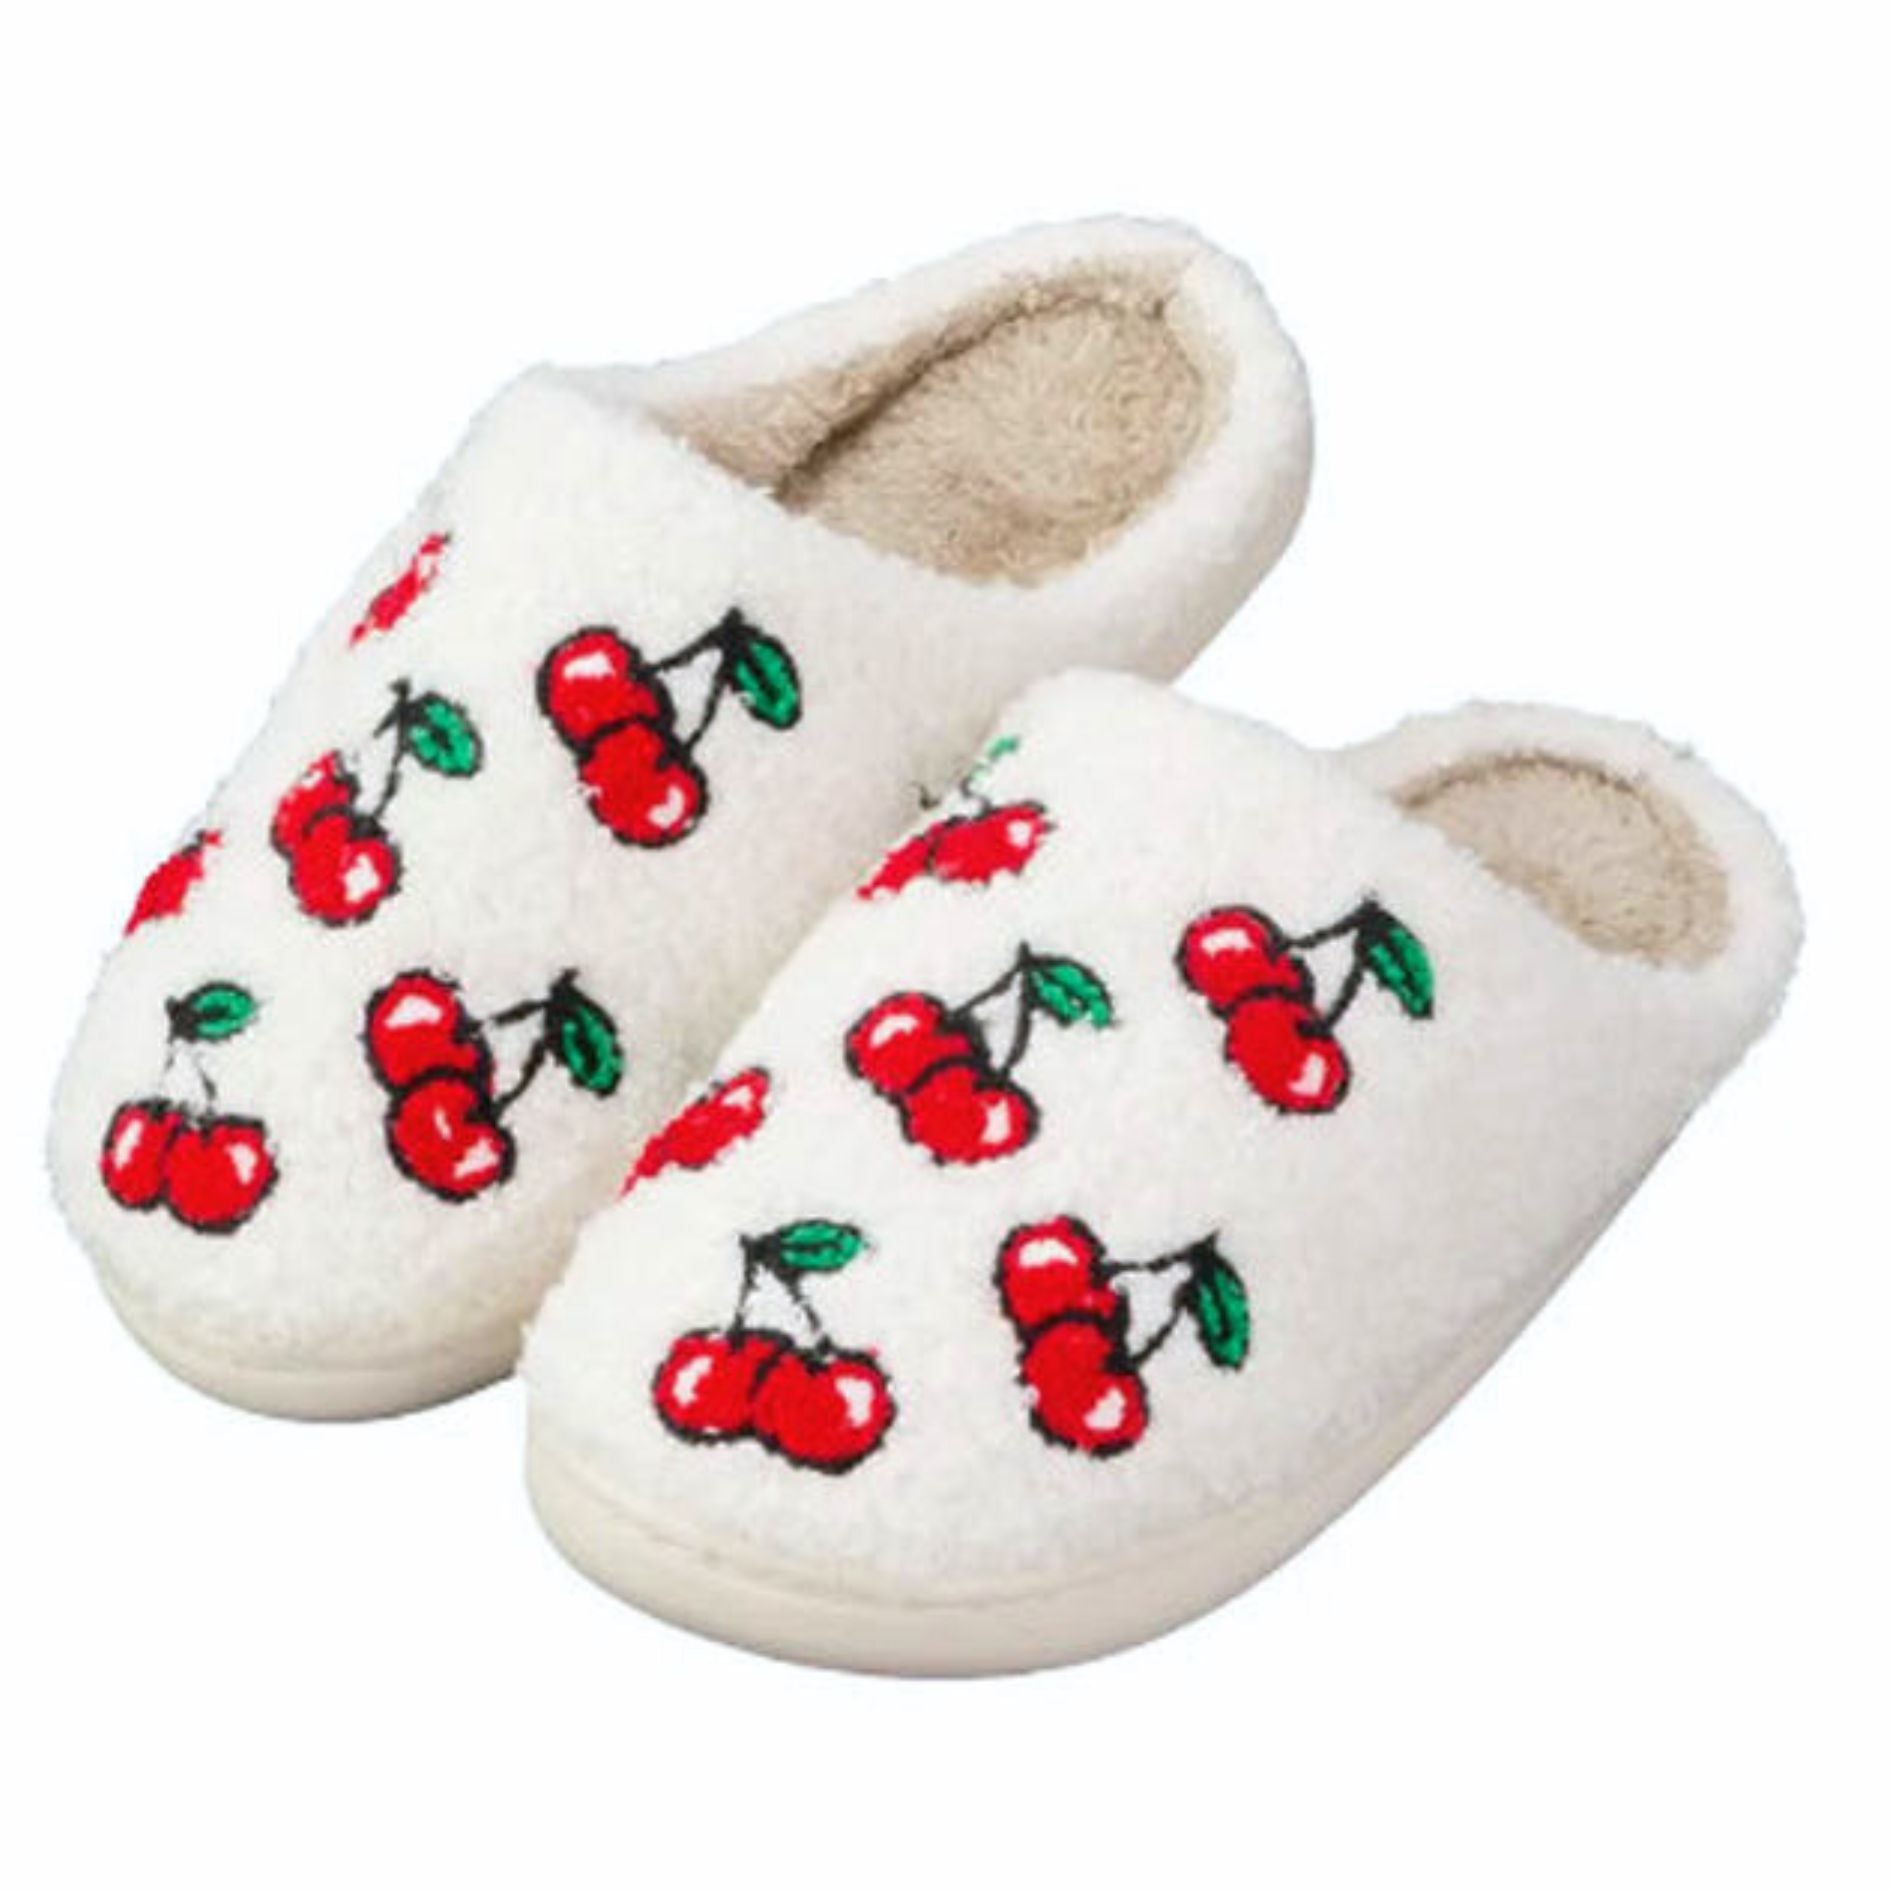 [SIZE SMALL ONLY REMAINING] Cherries Plush Cozy Women's Slippers | Giftable Slip-On Mules House Shoes